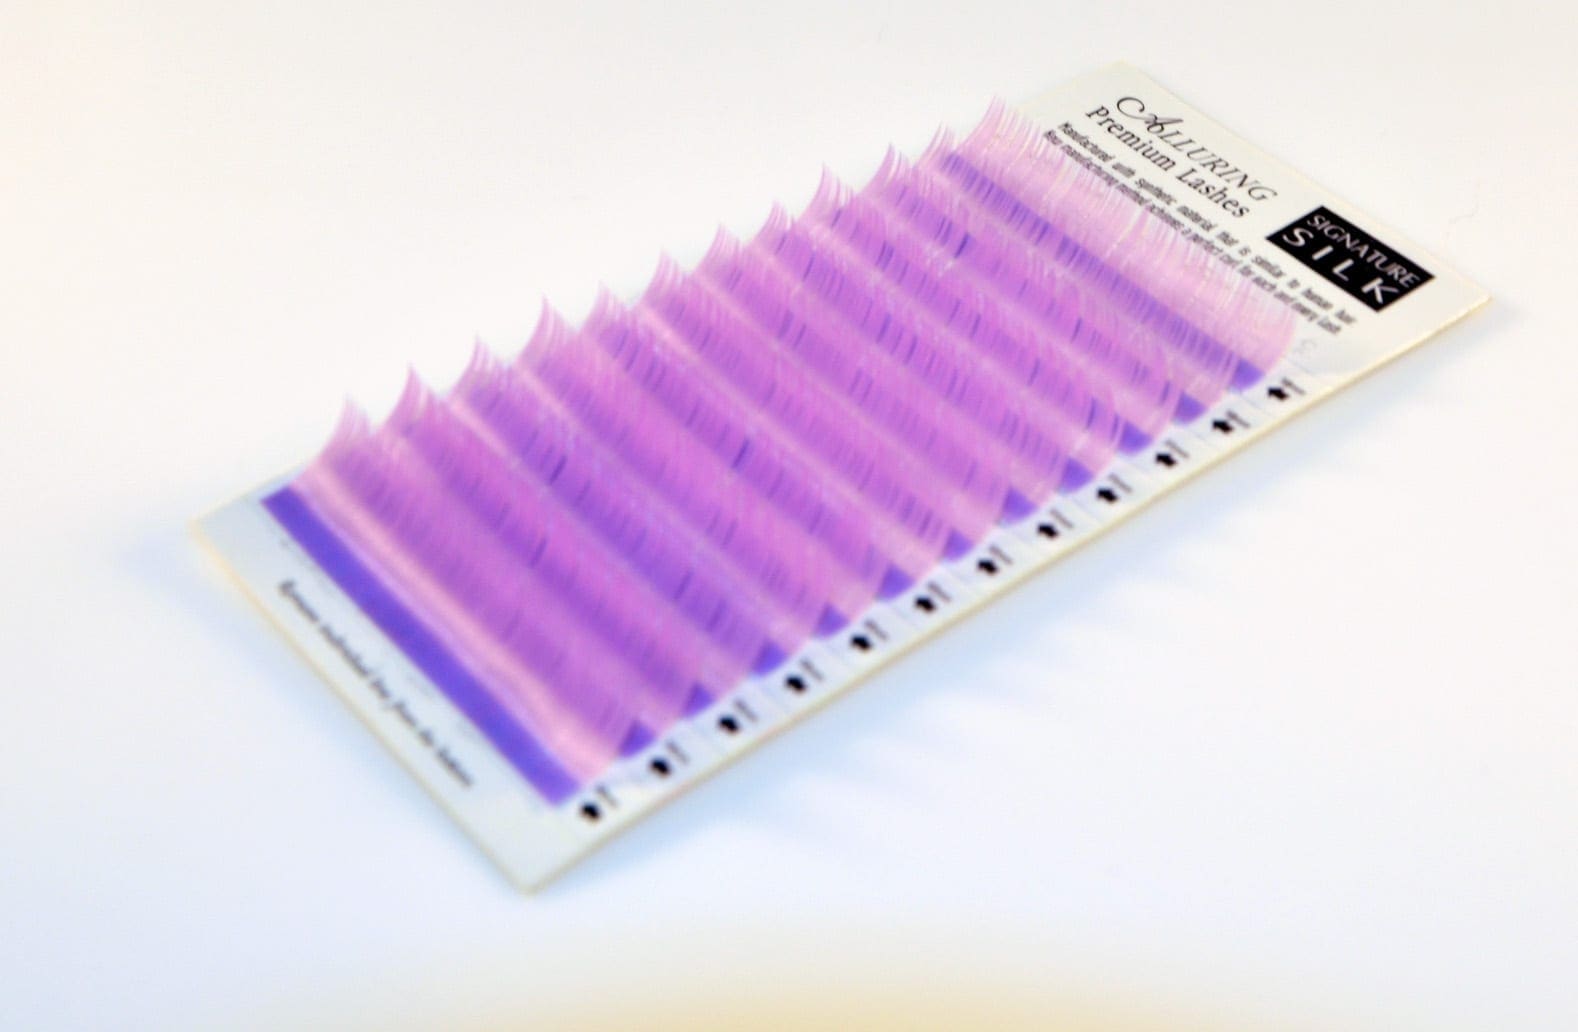 A purple strip of plastic is on the white surface.